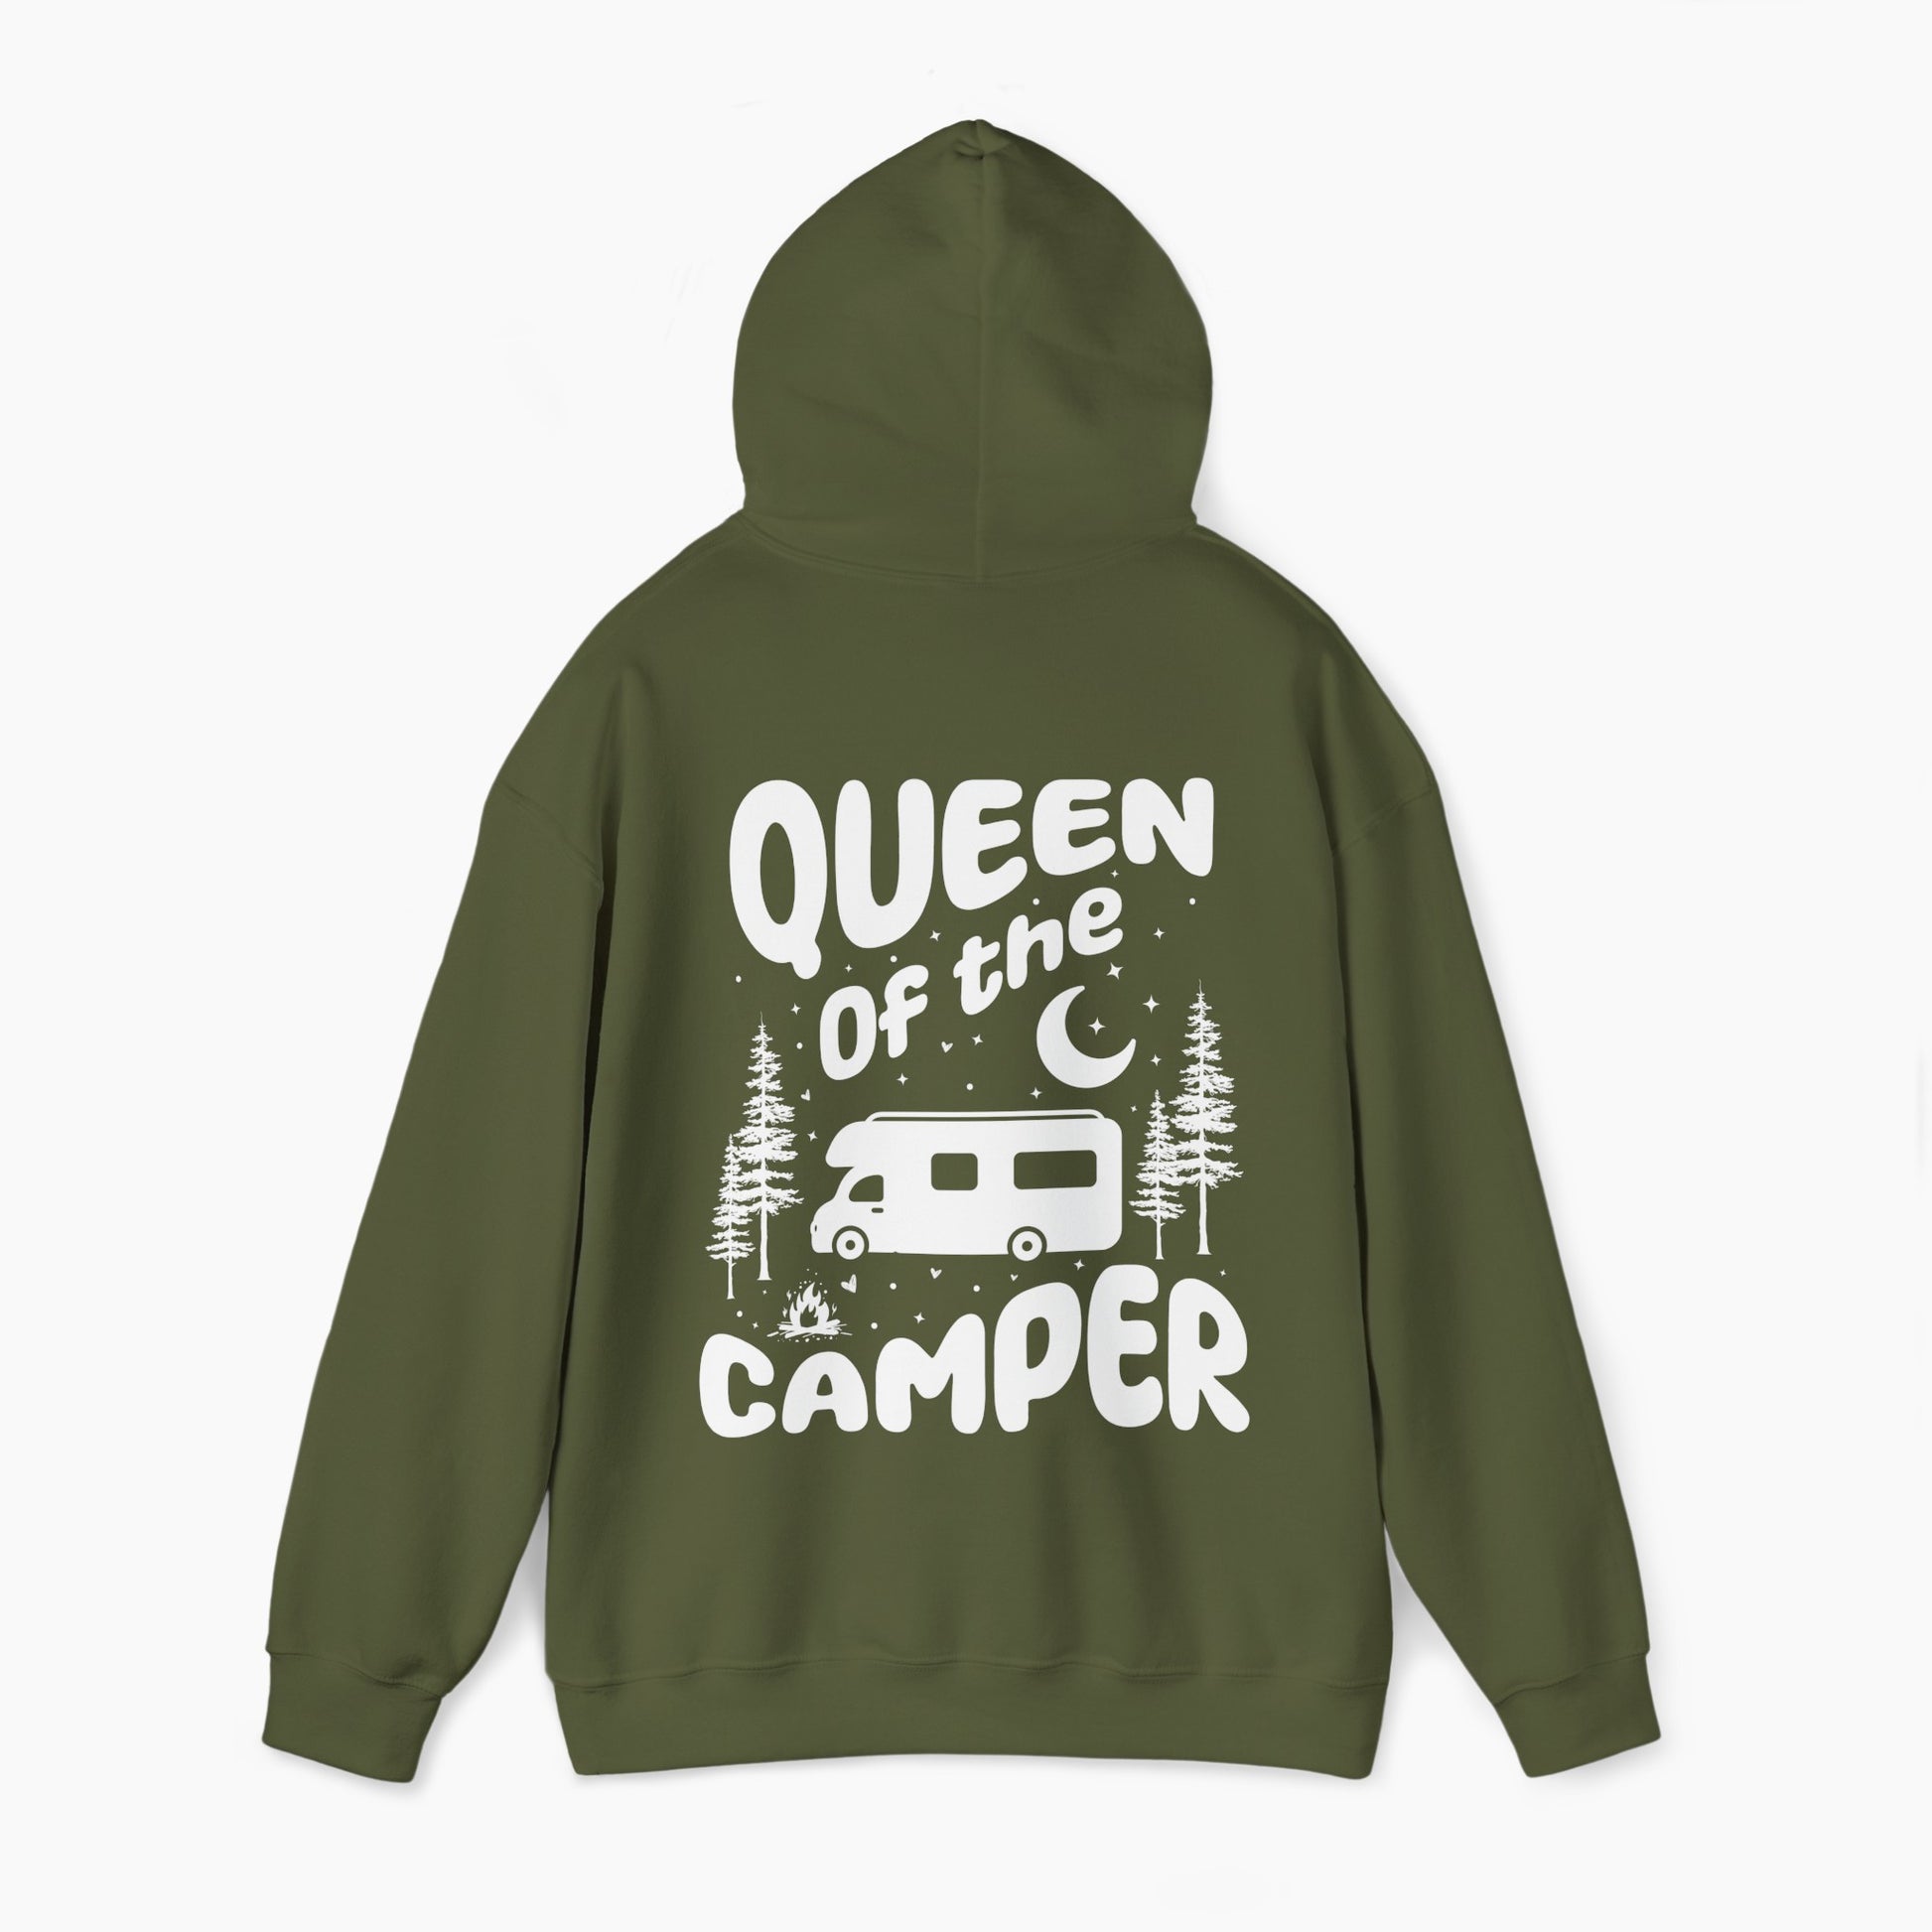 Back of a military green hoodie with the text 'Queen of the Camper' surrounded by elements including a camping van, stars, trees, and a campfire, on a plain background.